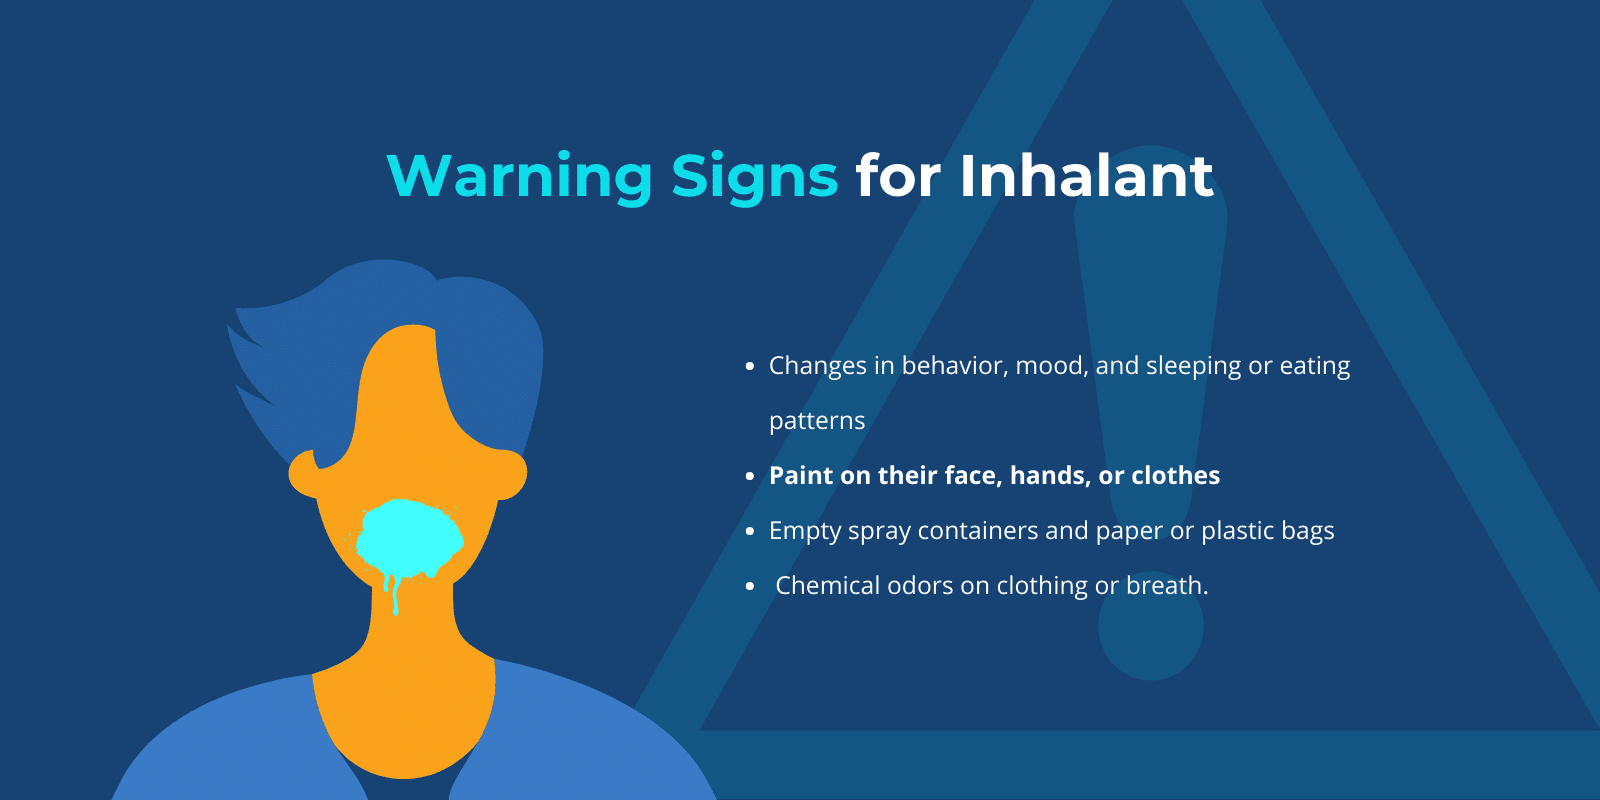 An illustration of a person with paint stain on his mouth next to a list of inhalant abuse warning signs